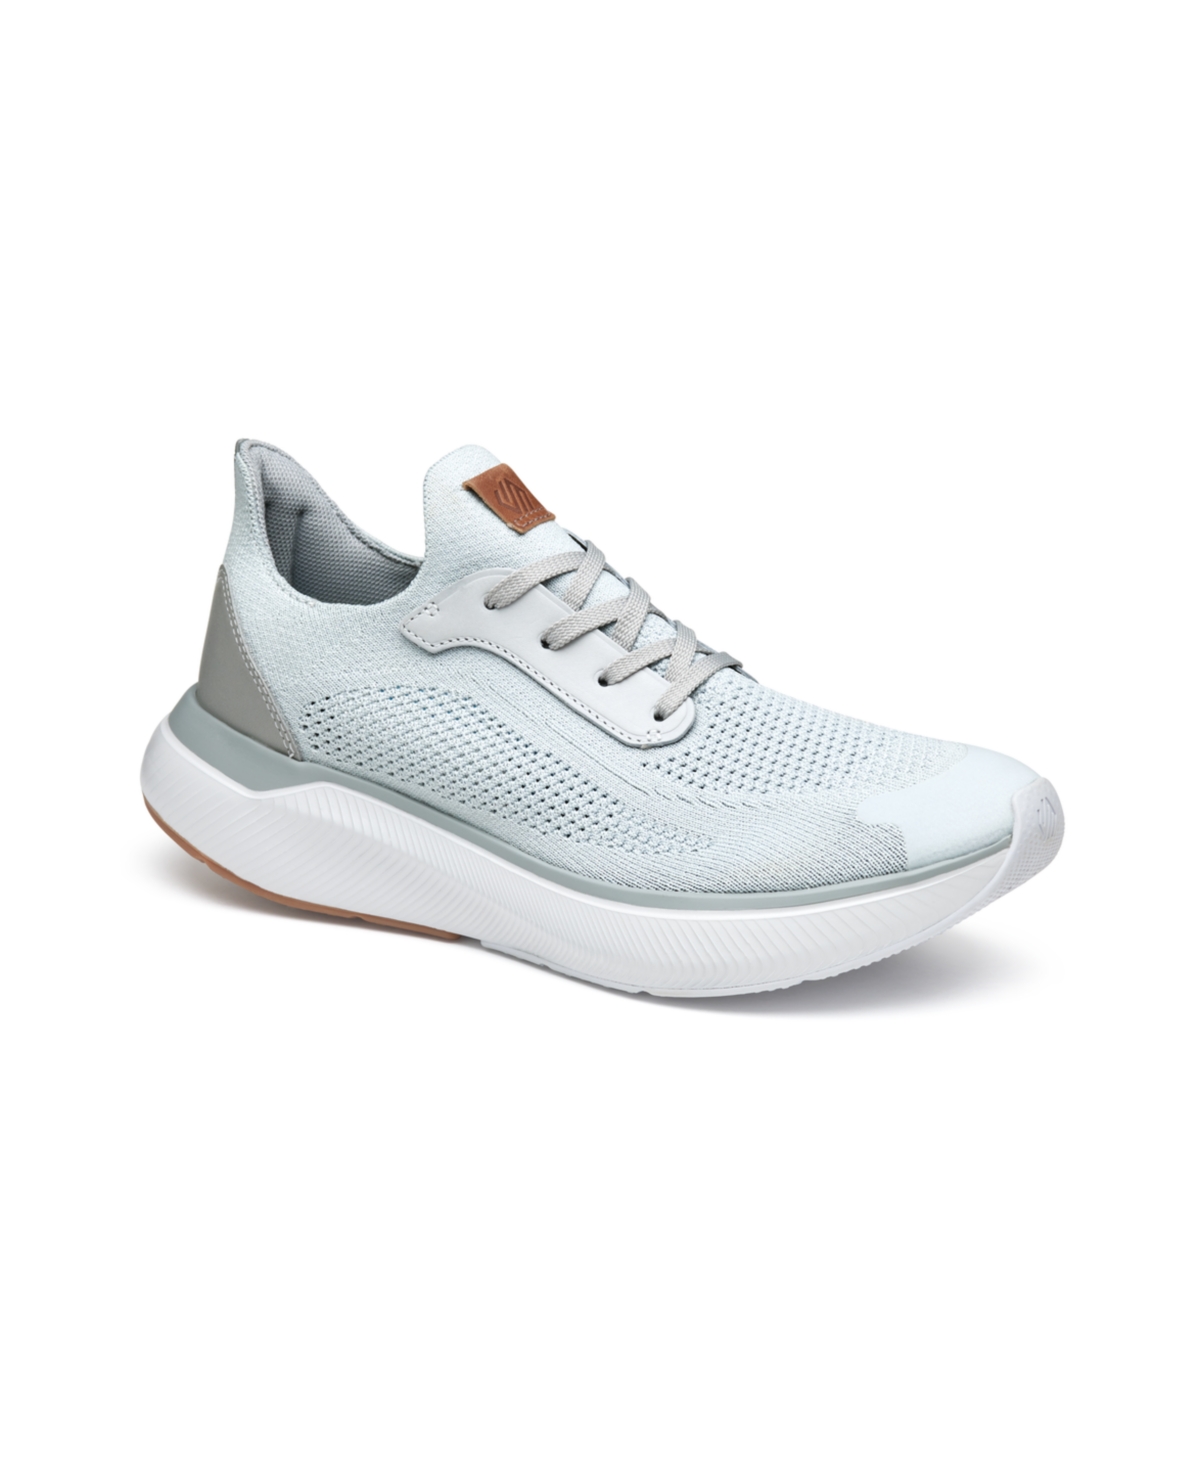 Men's Miles Knit Lace-Up Sneakers - Light Gray